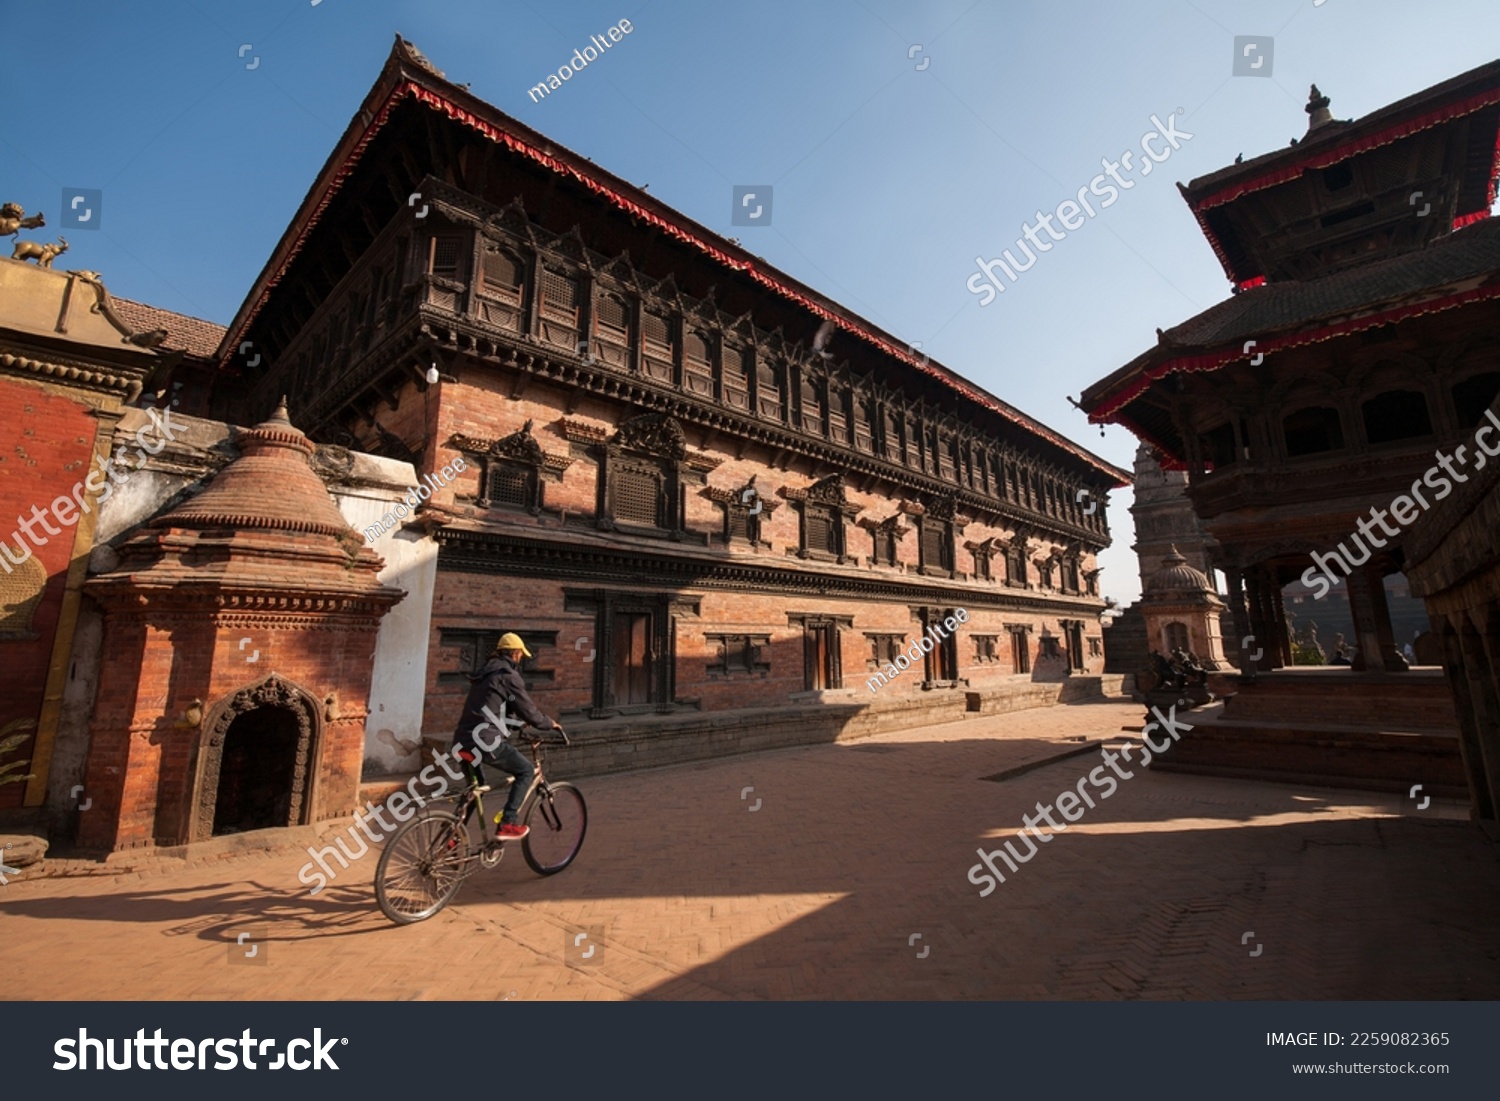 The Palace of Fifty-five Windows in Bhaktapur Durbar Square, is a former royal palace complex located in Bhaktapur, Nepal #2259082365